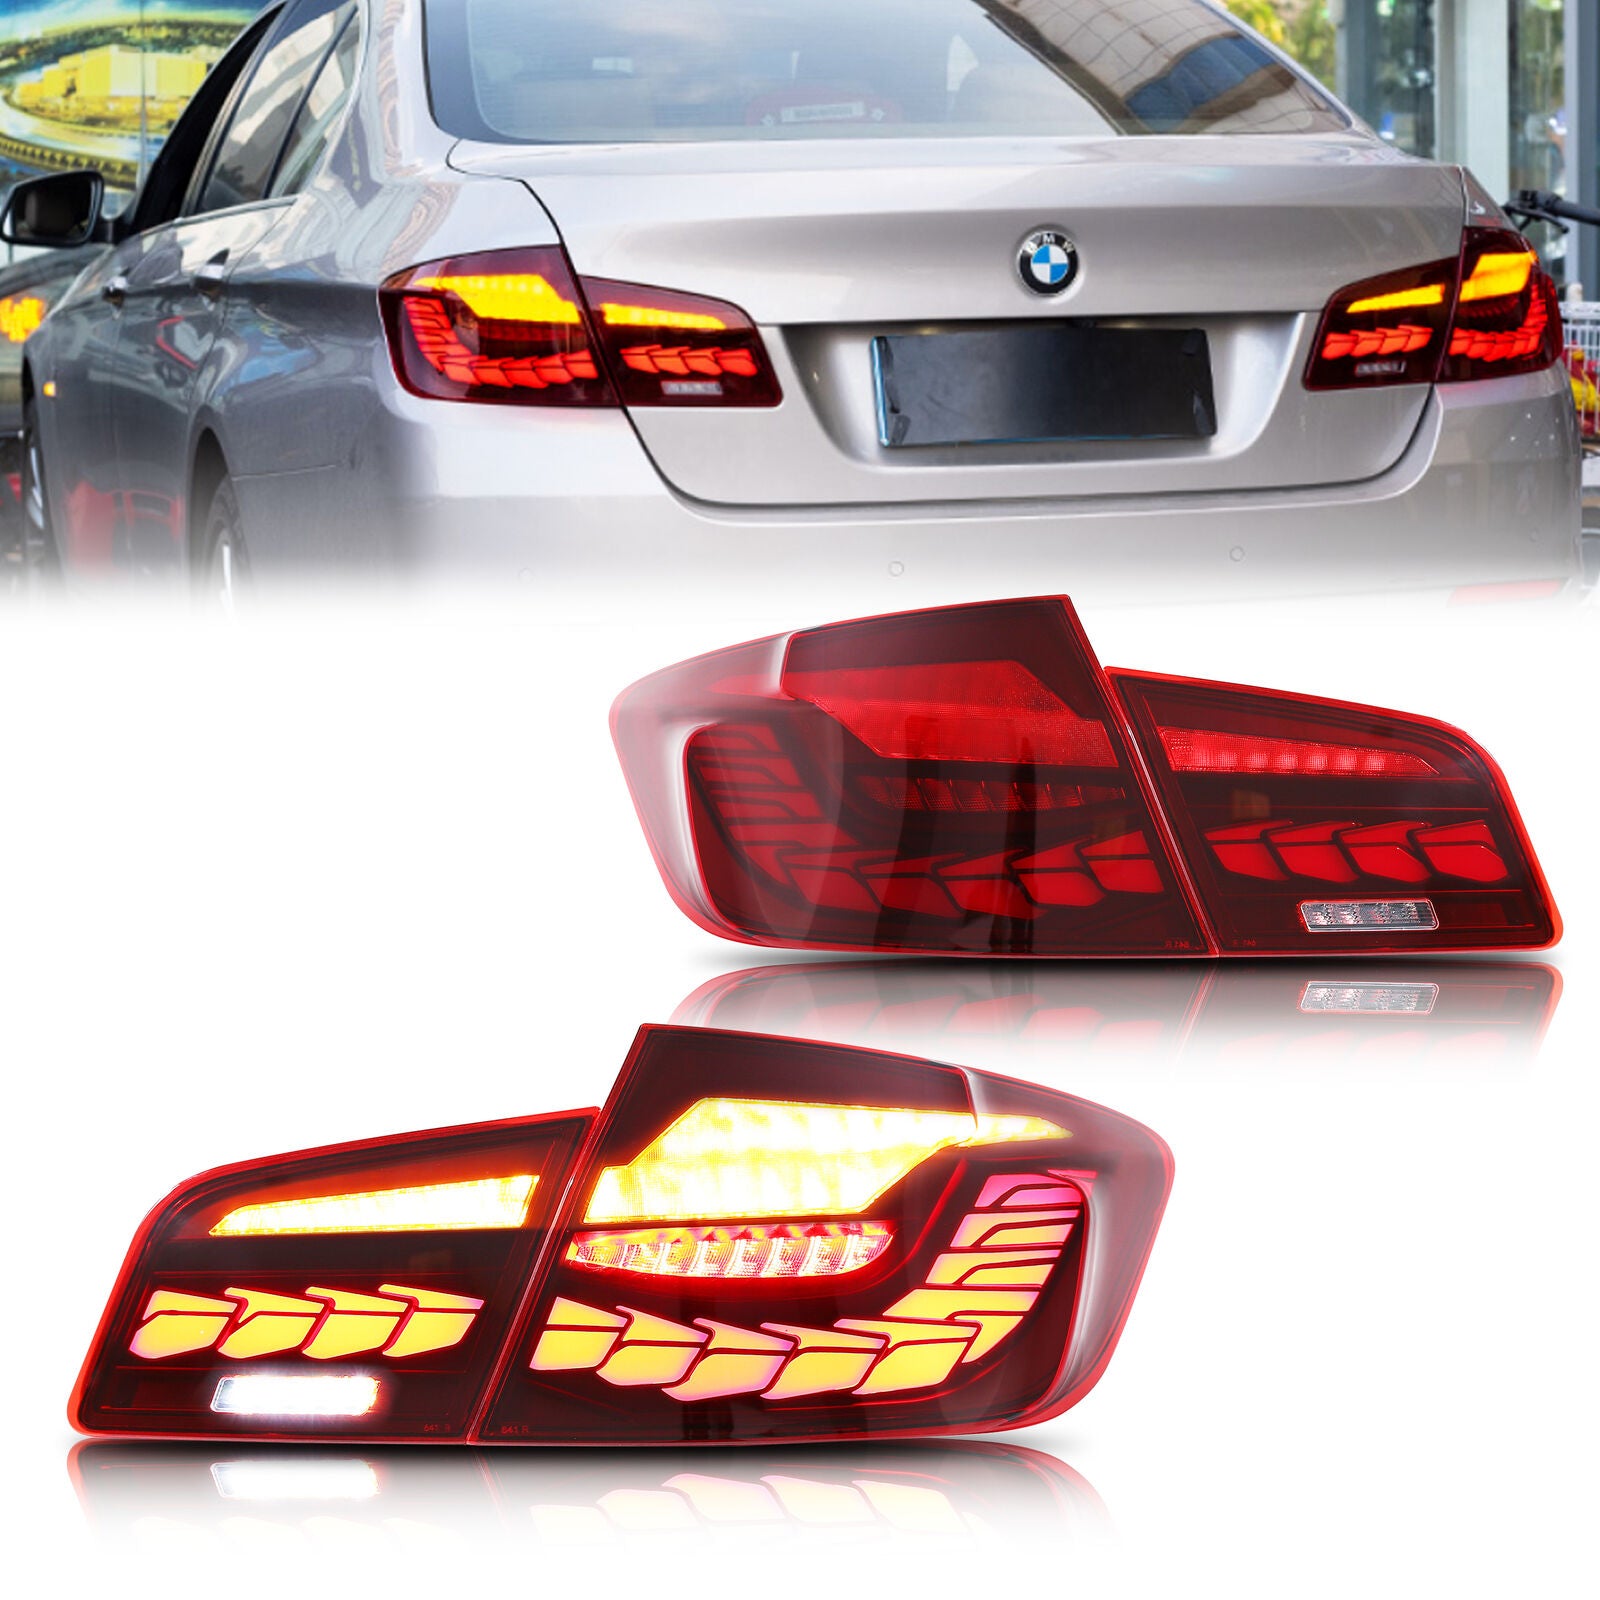 inginuity time LED GTS Tail Lights for BMW Series 5 F10 F18 2011-2017 Start  Up Animation Sequential Indicator Rear Lamp Assembly